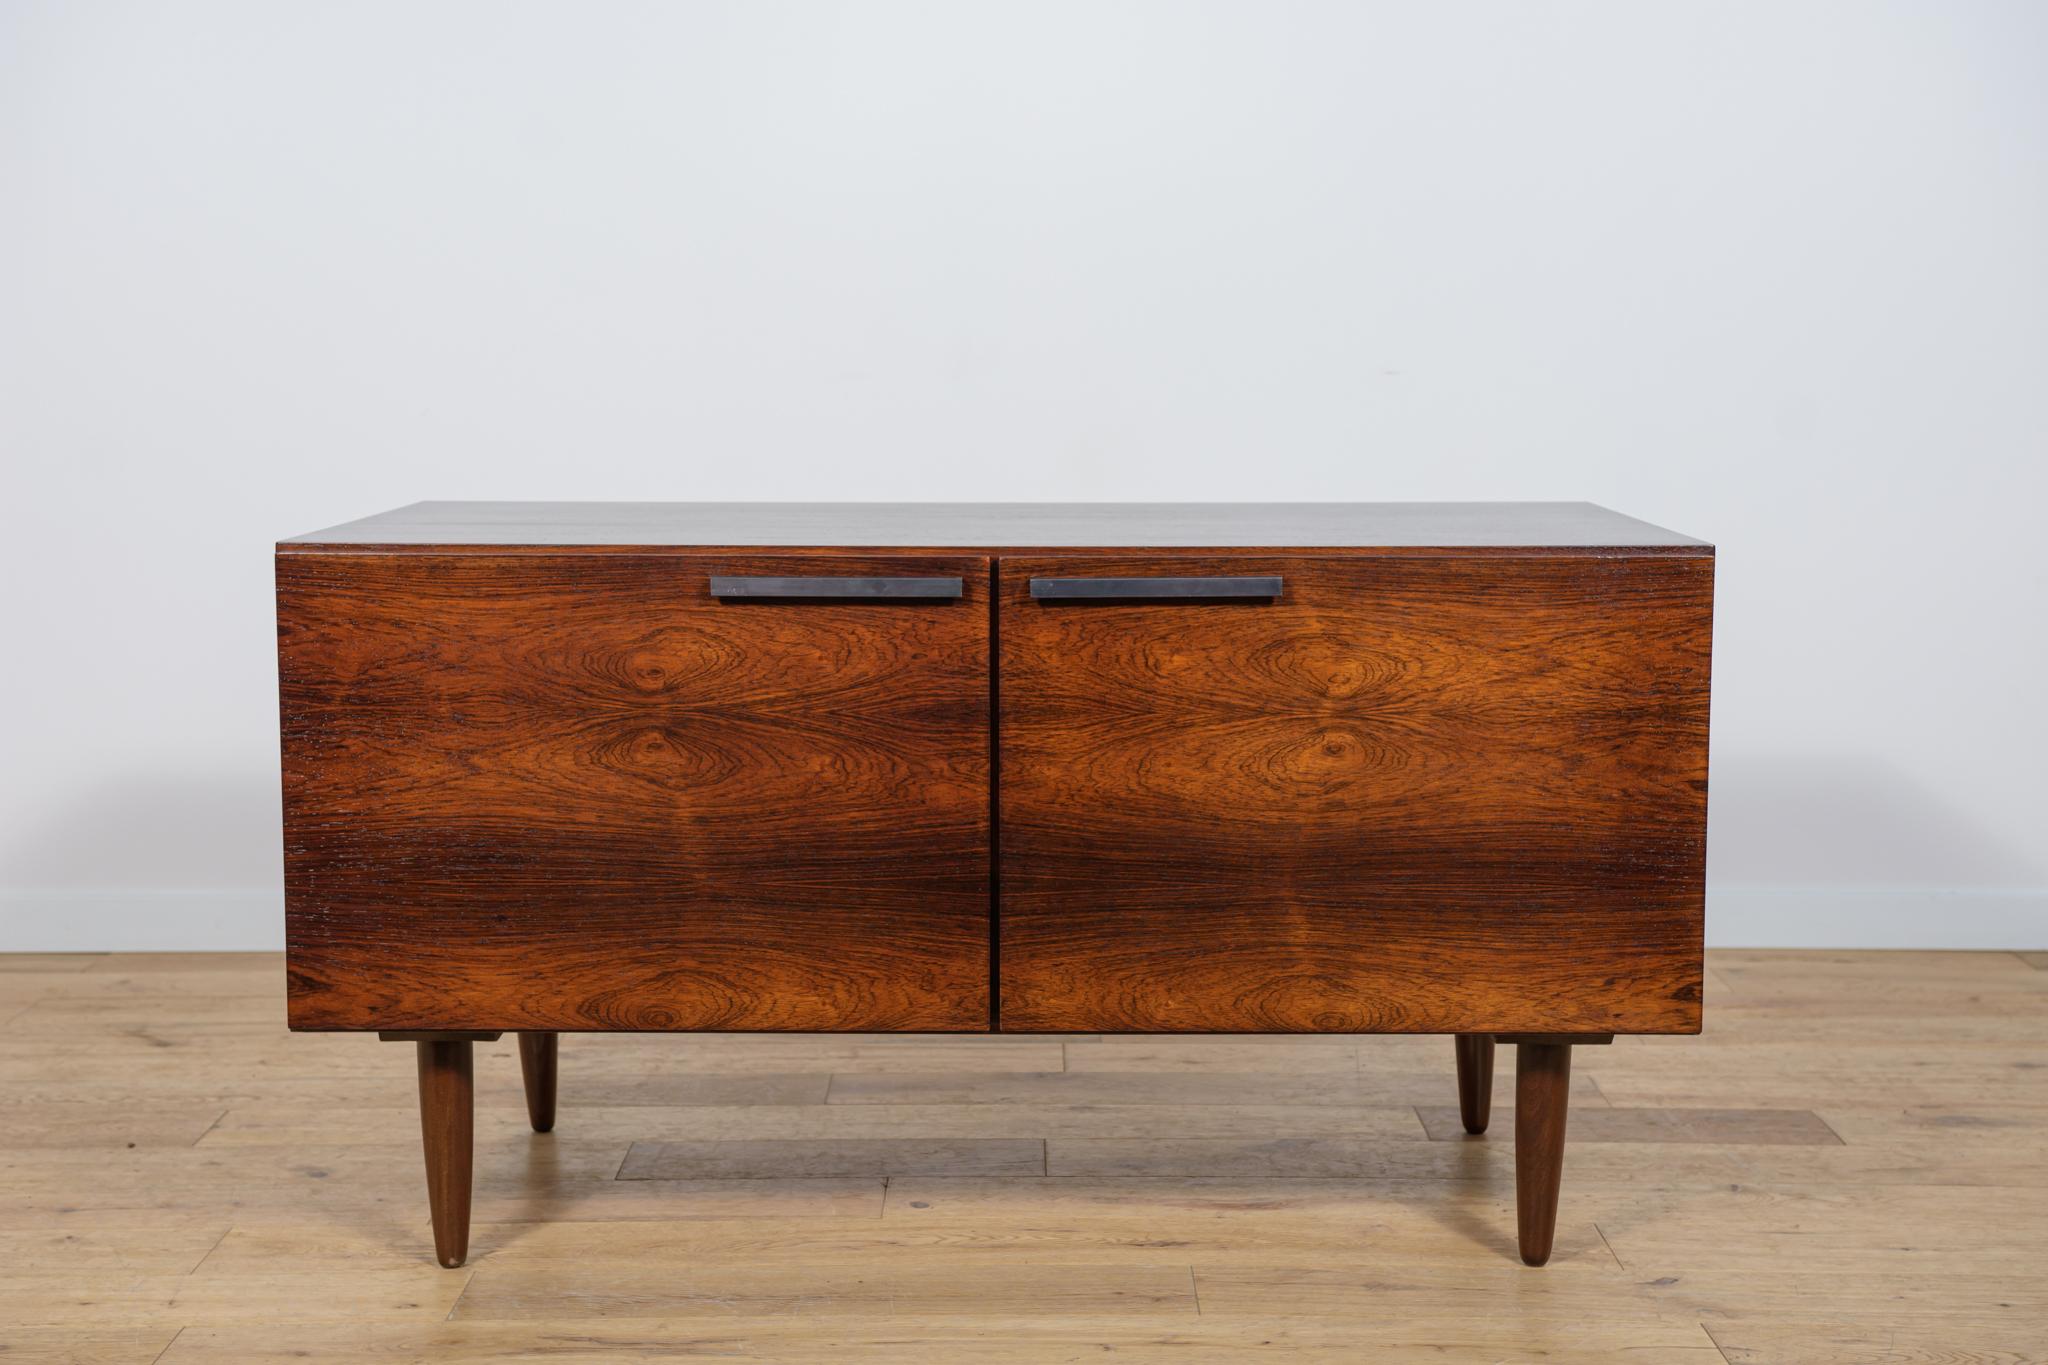 A sideboard designed by the Danish designer Ib Kofod-Larsen, produced in the 1960s in the Danish factory Faarup Mobelfabrik. The sideboard is made of rosewood. The sideboard has undergone a comprehensive carpentry renovation. The chest of drawers